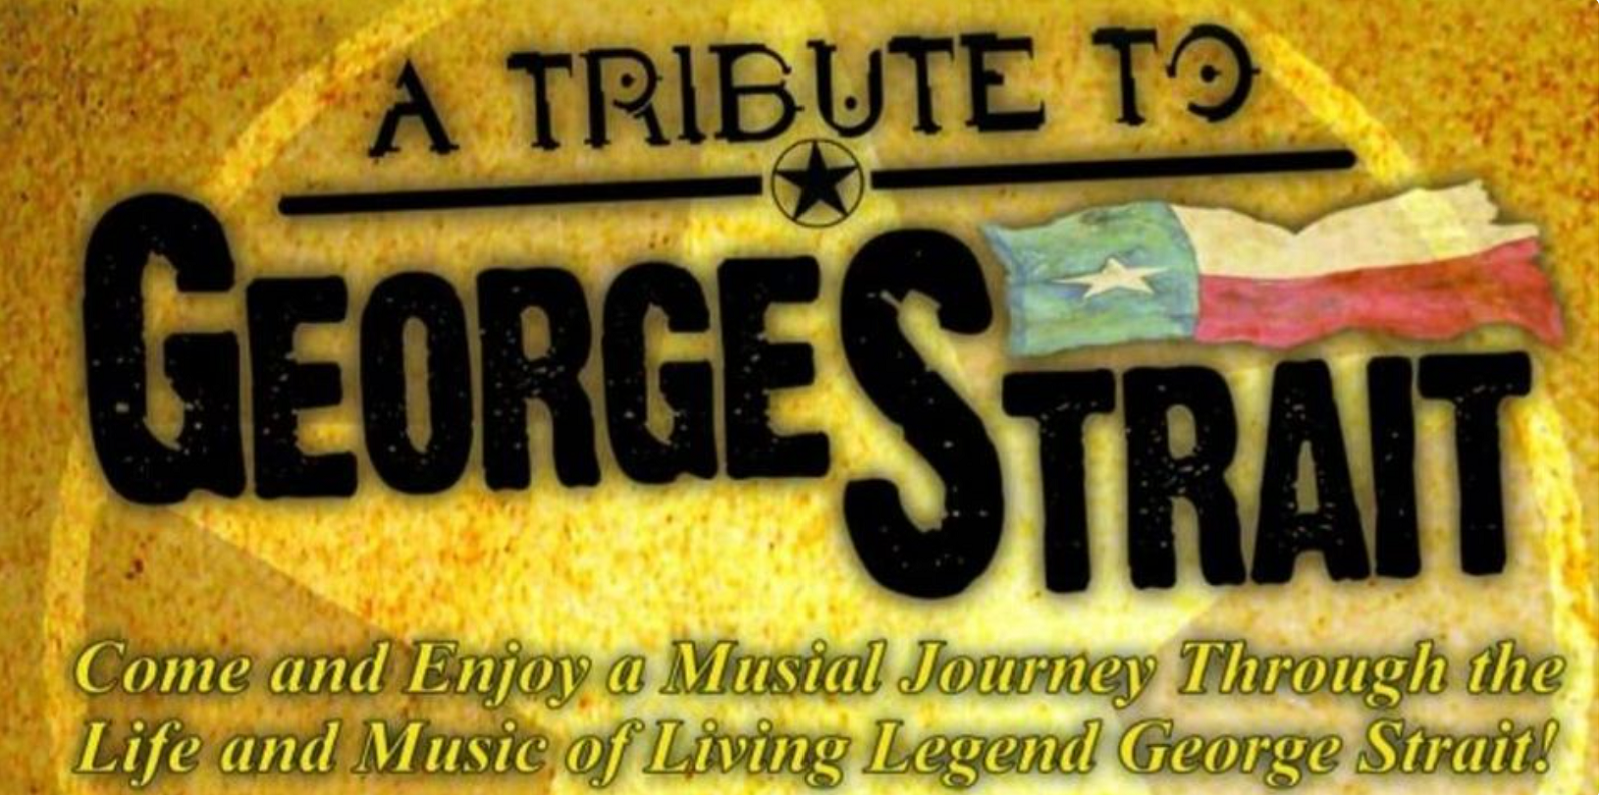 Get Your Tickets for the July 30th George Strait Tribute! This Fundraiser Keeps our Faulk County Transit Bus in Business! Photo - Click Here to See